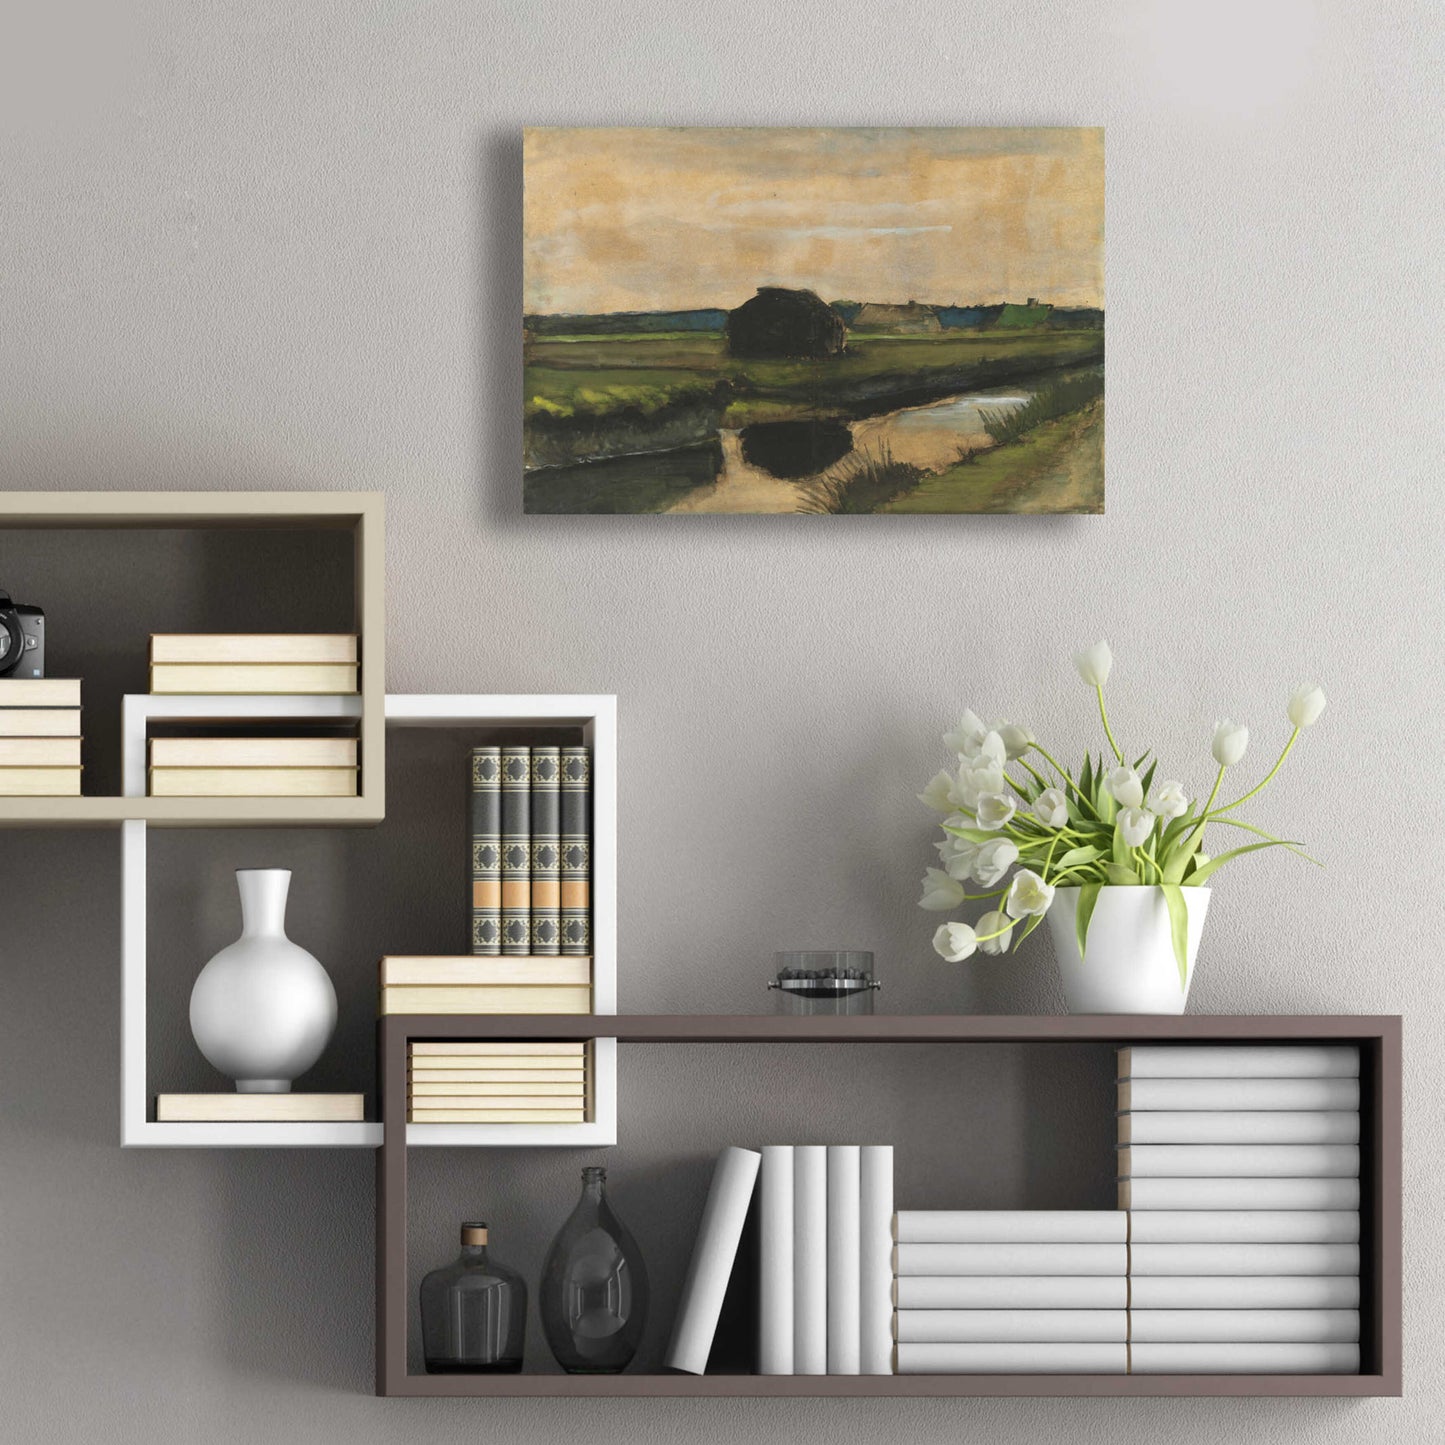 Epic Art 'Landscape With A Stack Of Peat And Farmhouses' by Vincent Van Gogh, Acrylic Glass Wall Art,24x16